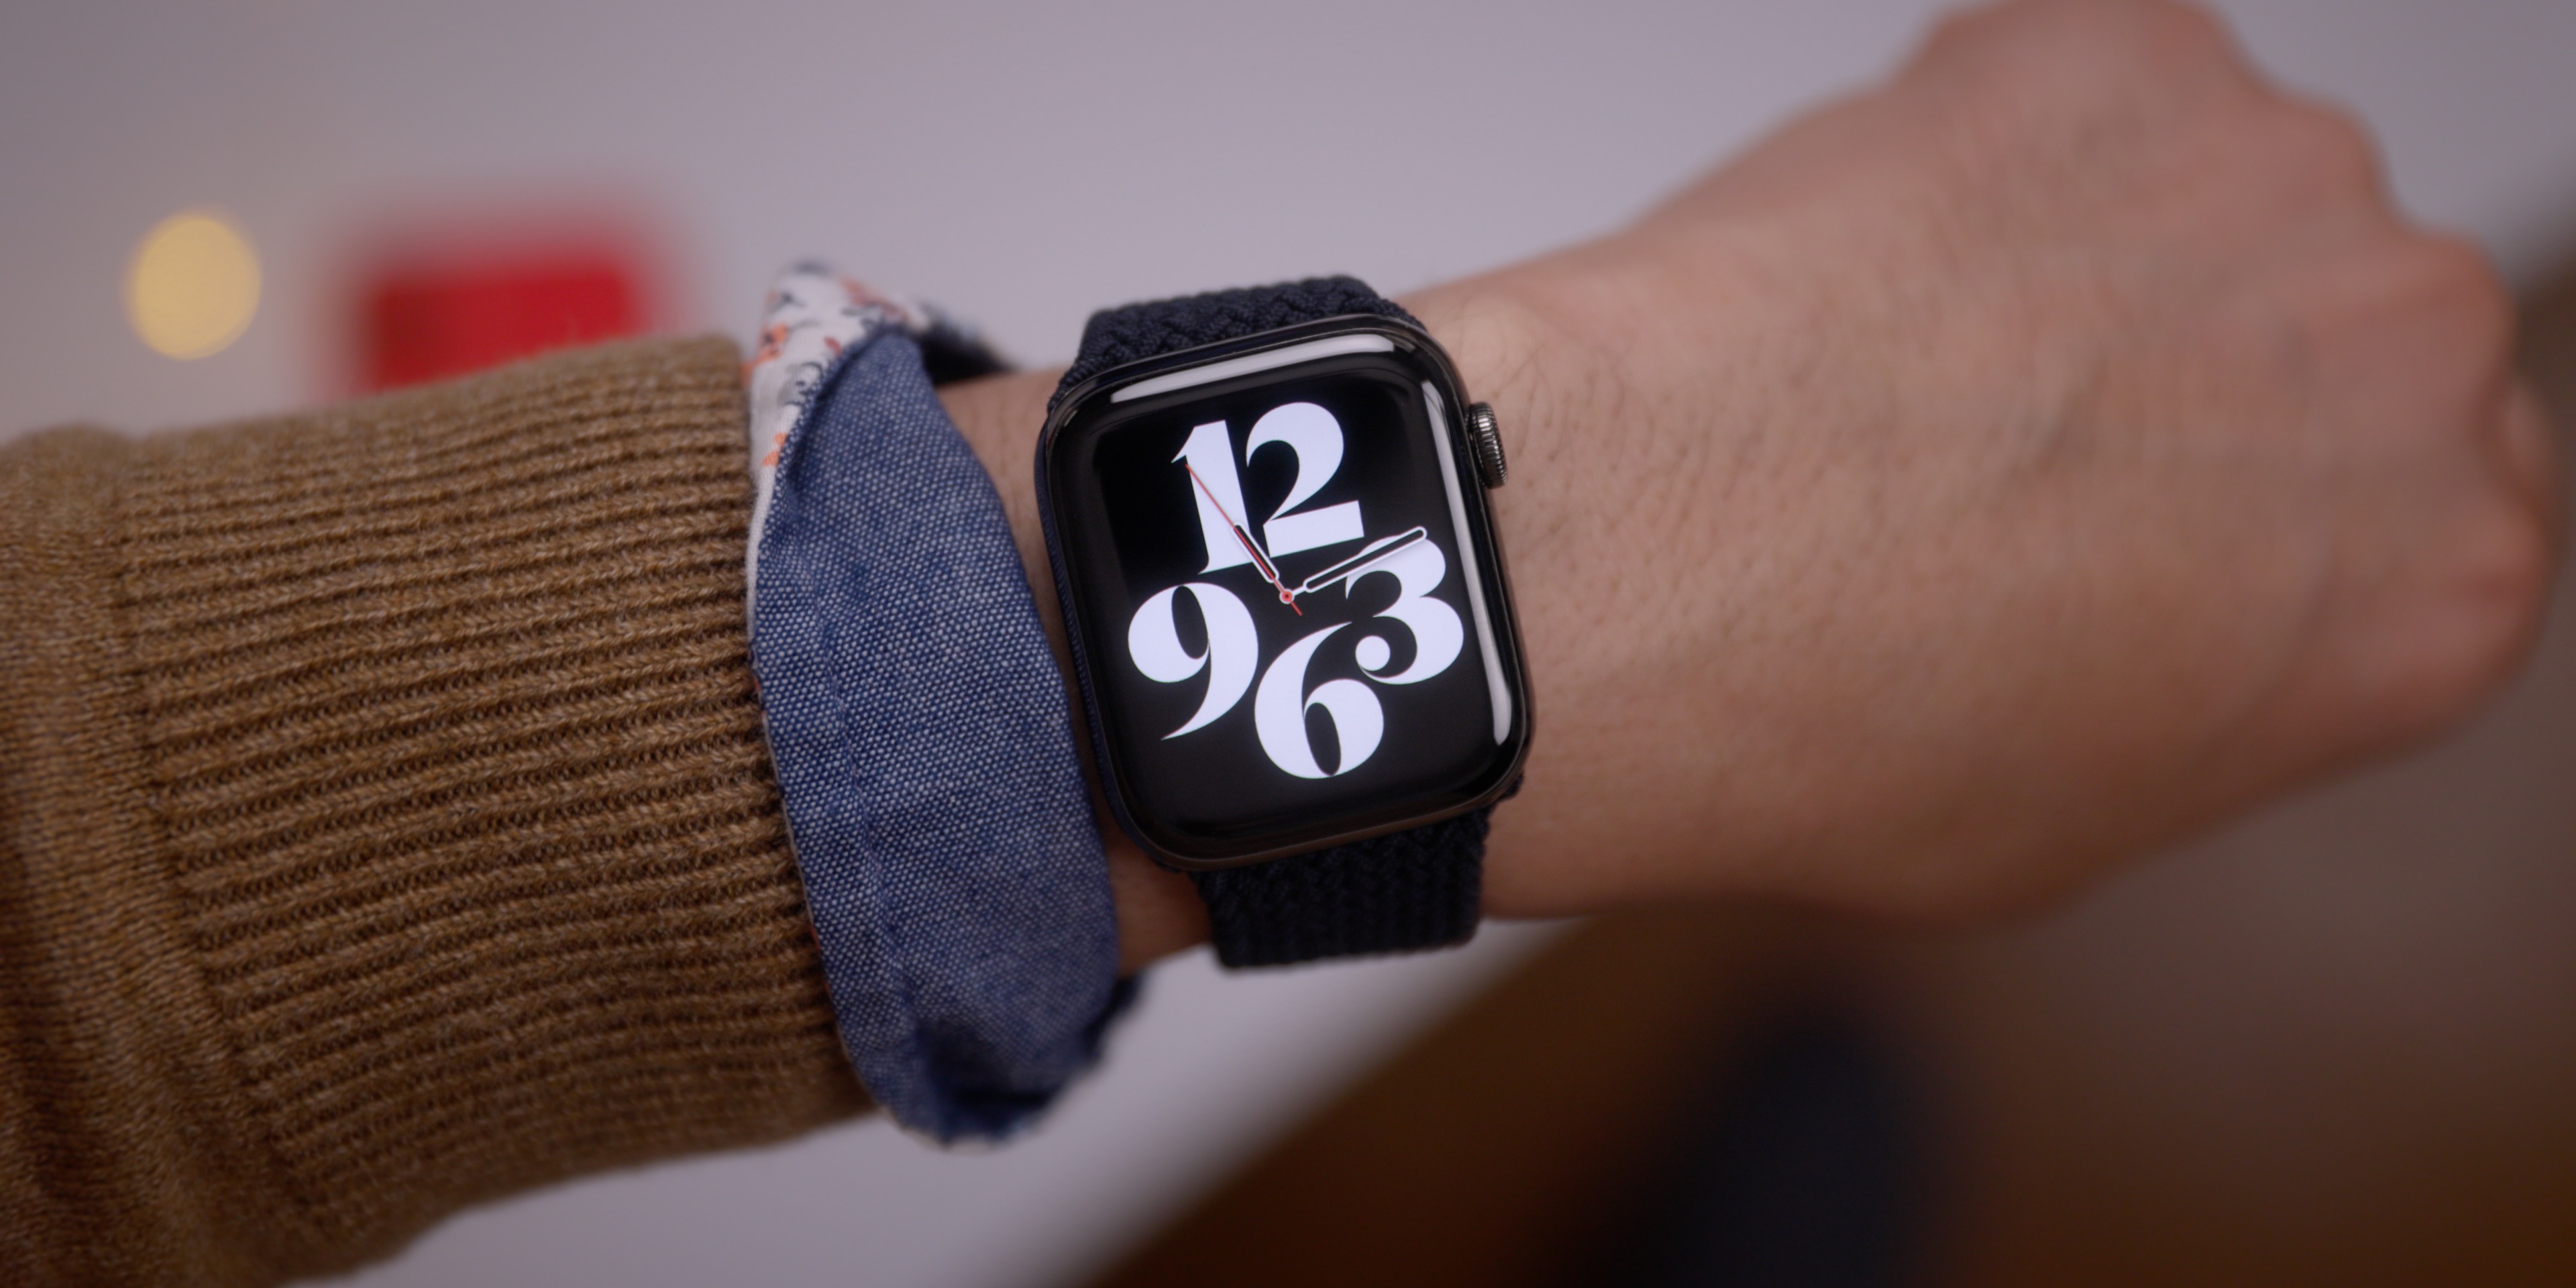 watchOS-7-recap-review-Typography-Watch-Face.jpg?quality=82&strip=all